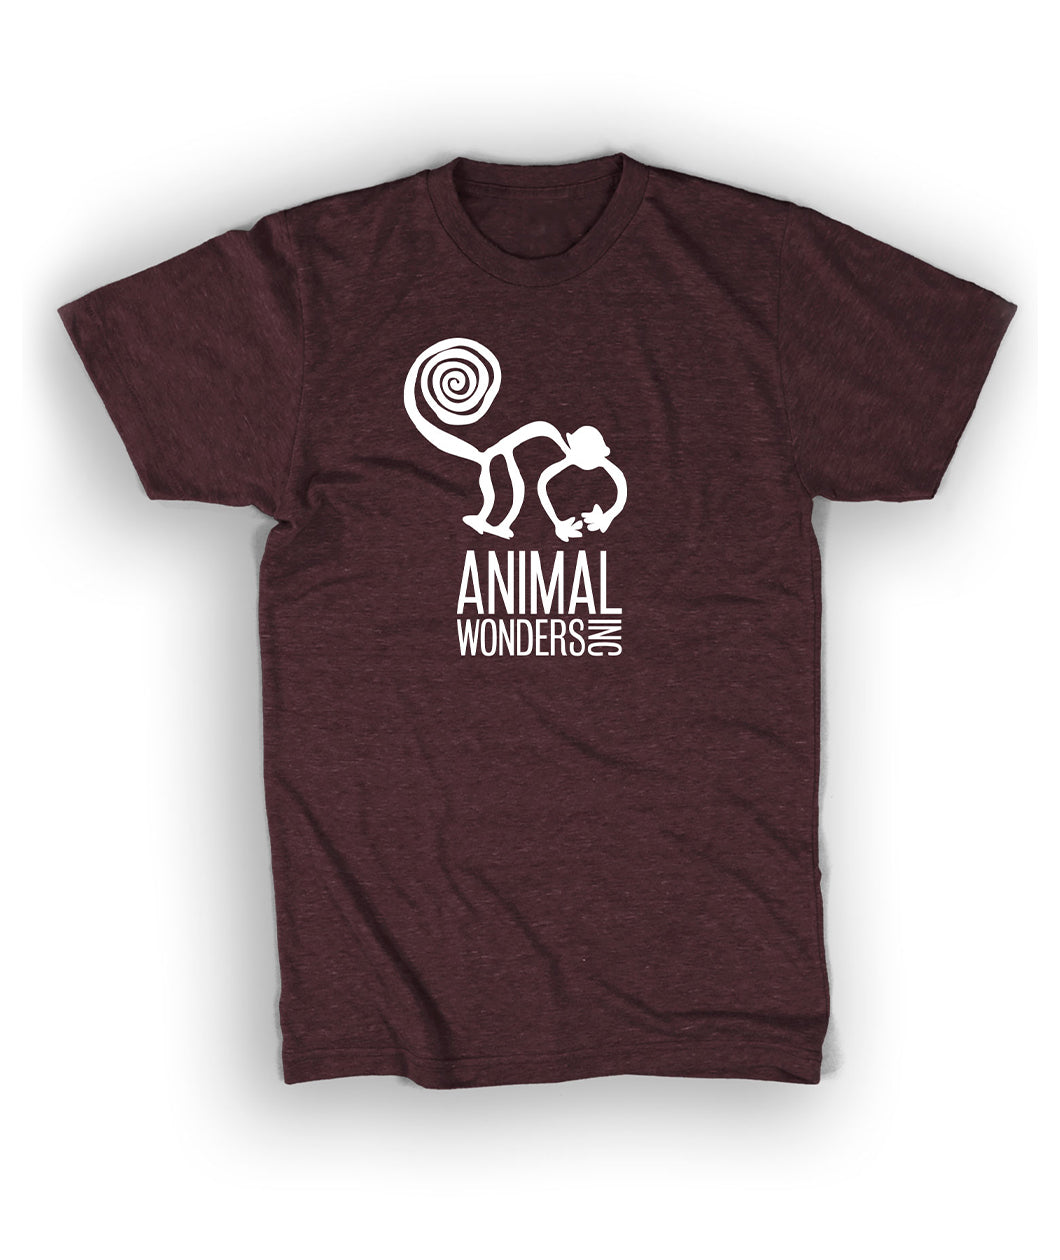 Dark maroon shirt with Animal Wonders in center of shirt in white. Logo is of cartoon silhouette drawing of monkey with spiral tail is above “Animal Wonders INC” with each word all caps, sans serif font, and varying sizes. INC is on its side at end of the word Wonders, both are below “Animal" - from Animal Wonders